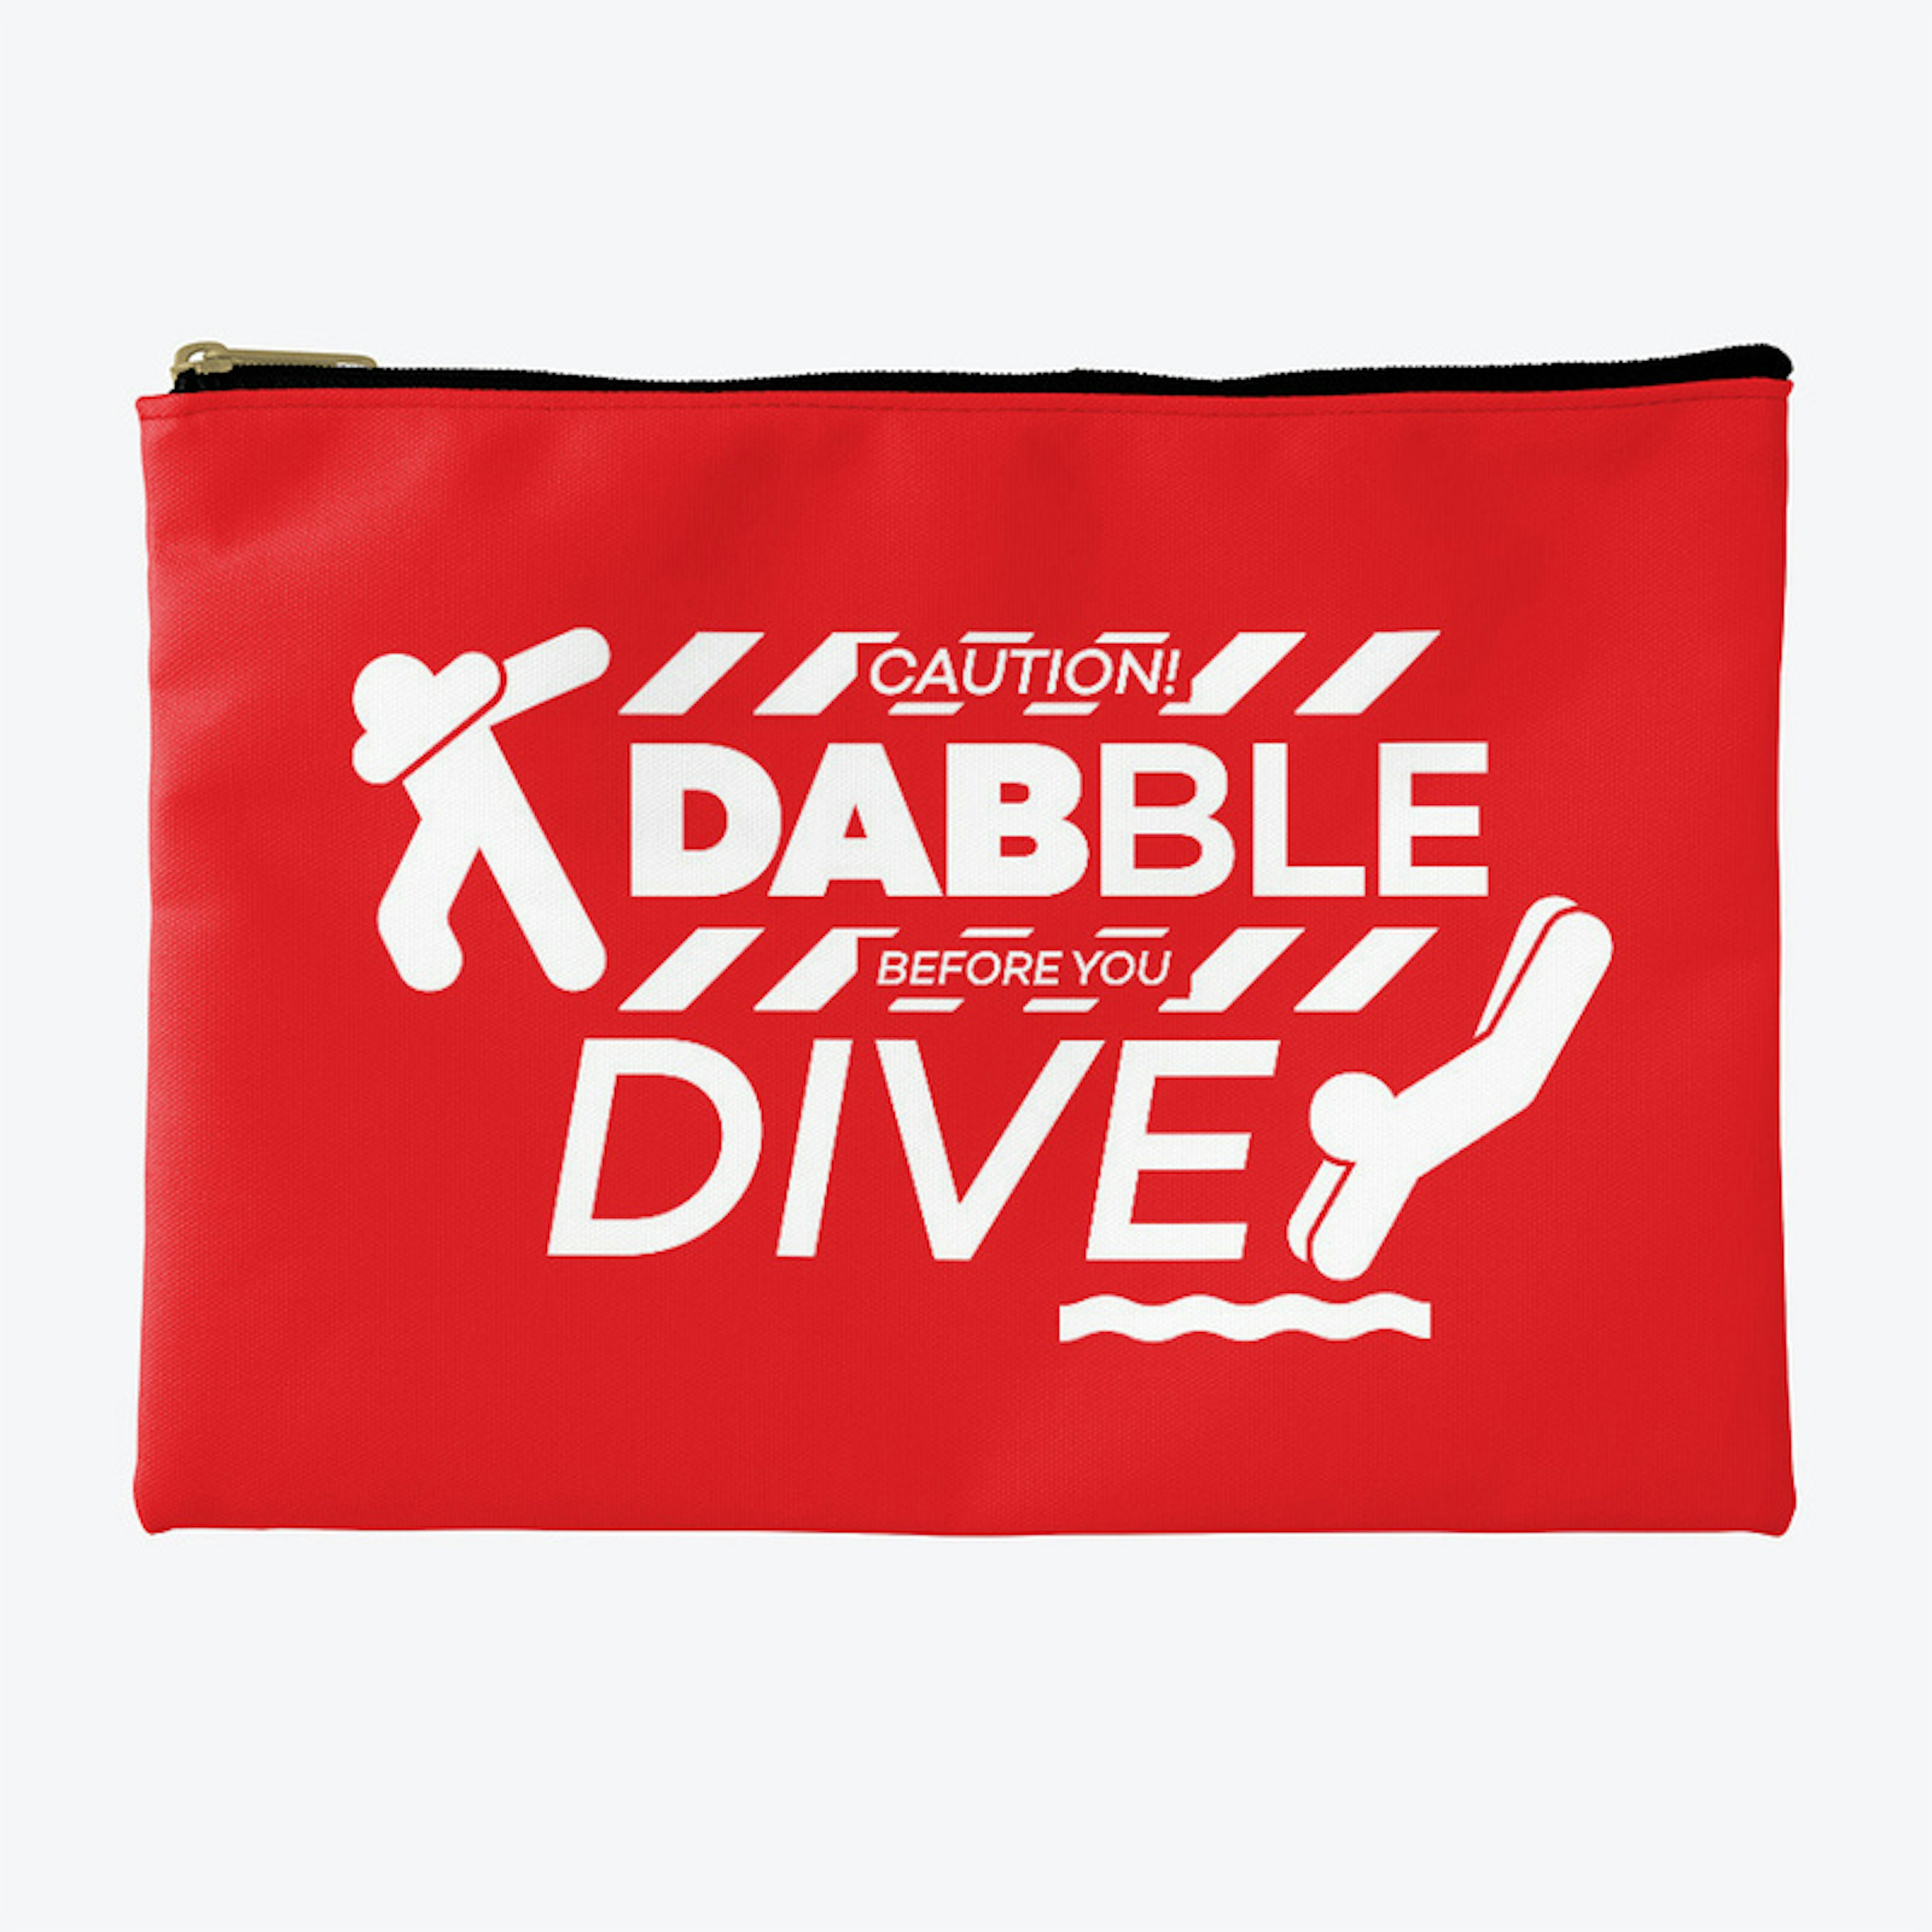 Dabble before you Dive